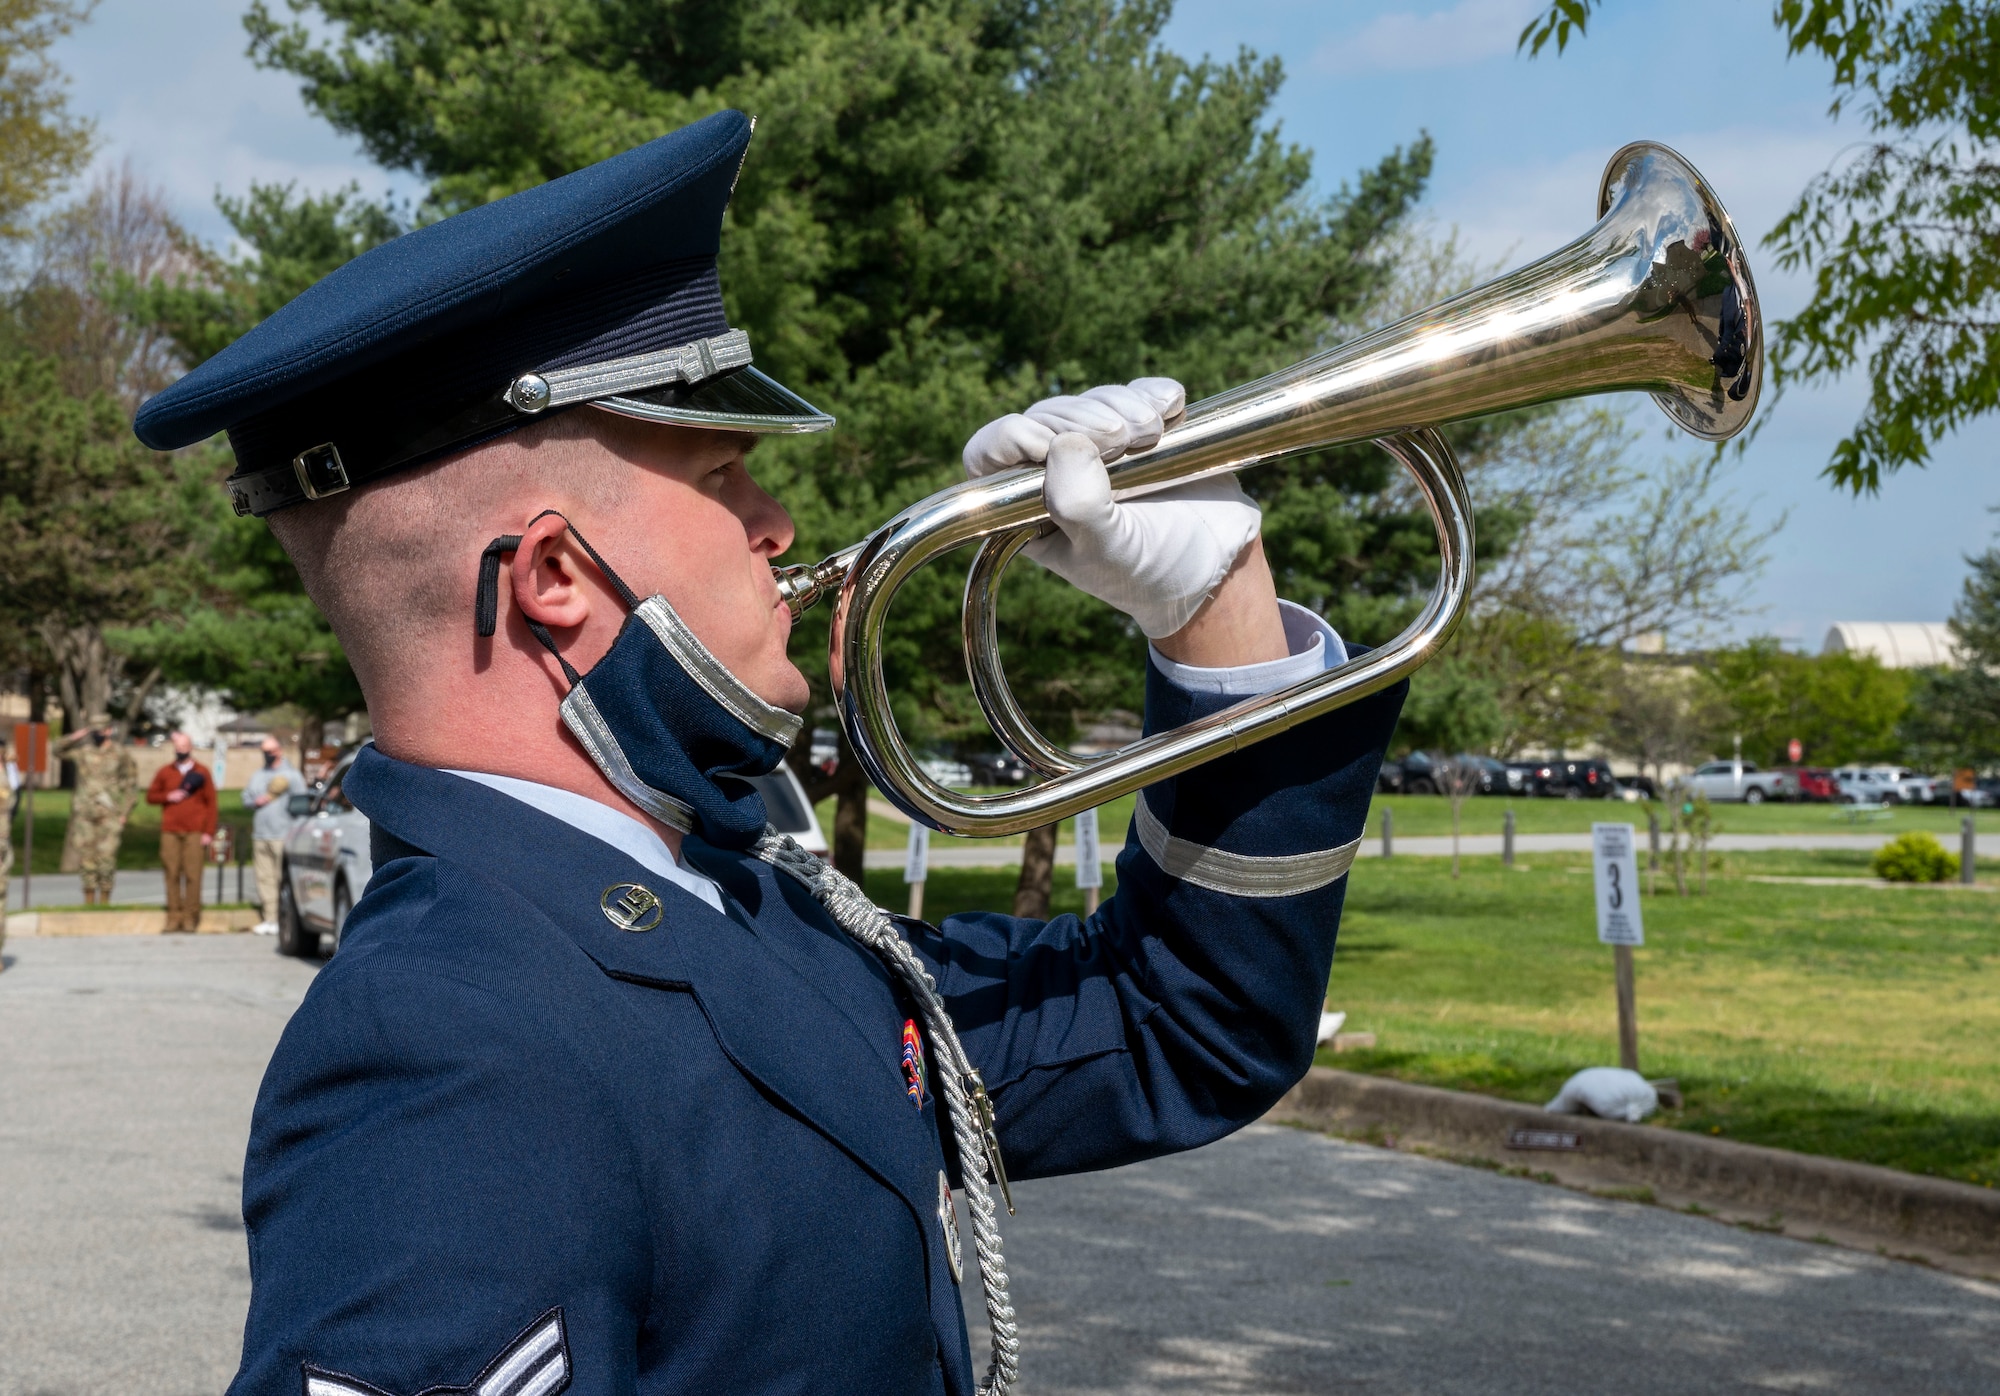 Airman 1st Class Owen McAvoy, 436th Force Support Squadron honor guard member, plays taps during retired Military Working Dog Kali’s last call at the veterinary treatment facility on Dover Air Force Base, Delaware, April 22, 2021. The last call is a ceremony used to show respect and bid farewell to a fallen police officer or MWD. Following seven years of service, Kali was humanely euthanized after suffering from a tumor in her abdomen. (U.S. Air Force photo by Airman 1st Class Cydney Lee)